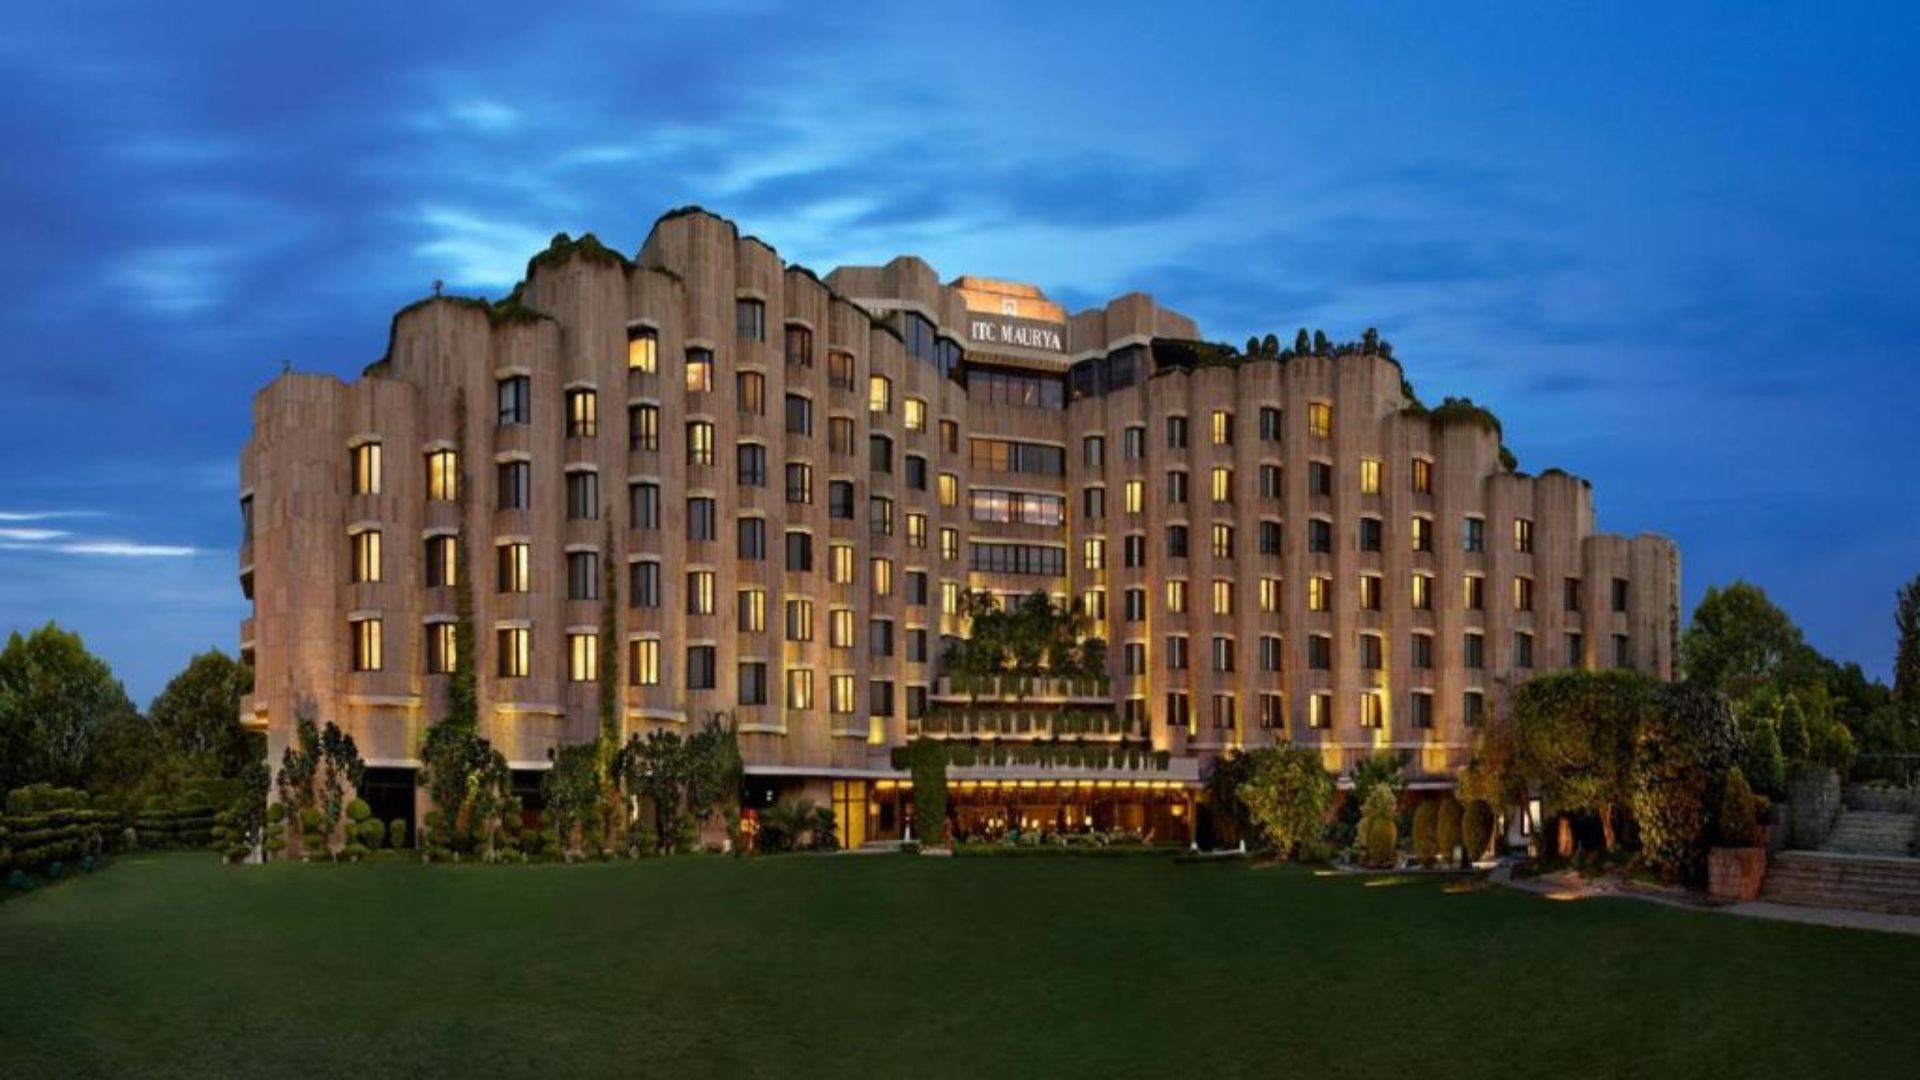 Best Hotels In Delhi That Should Be On Your Bucket List